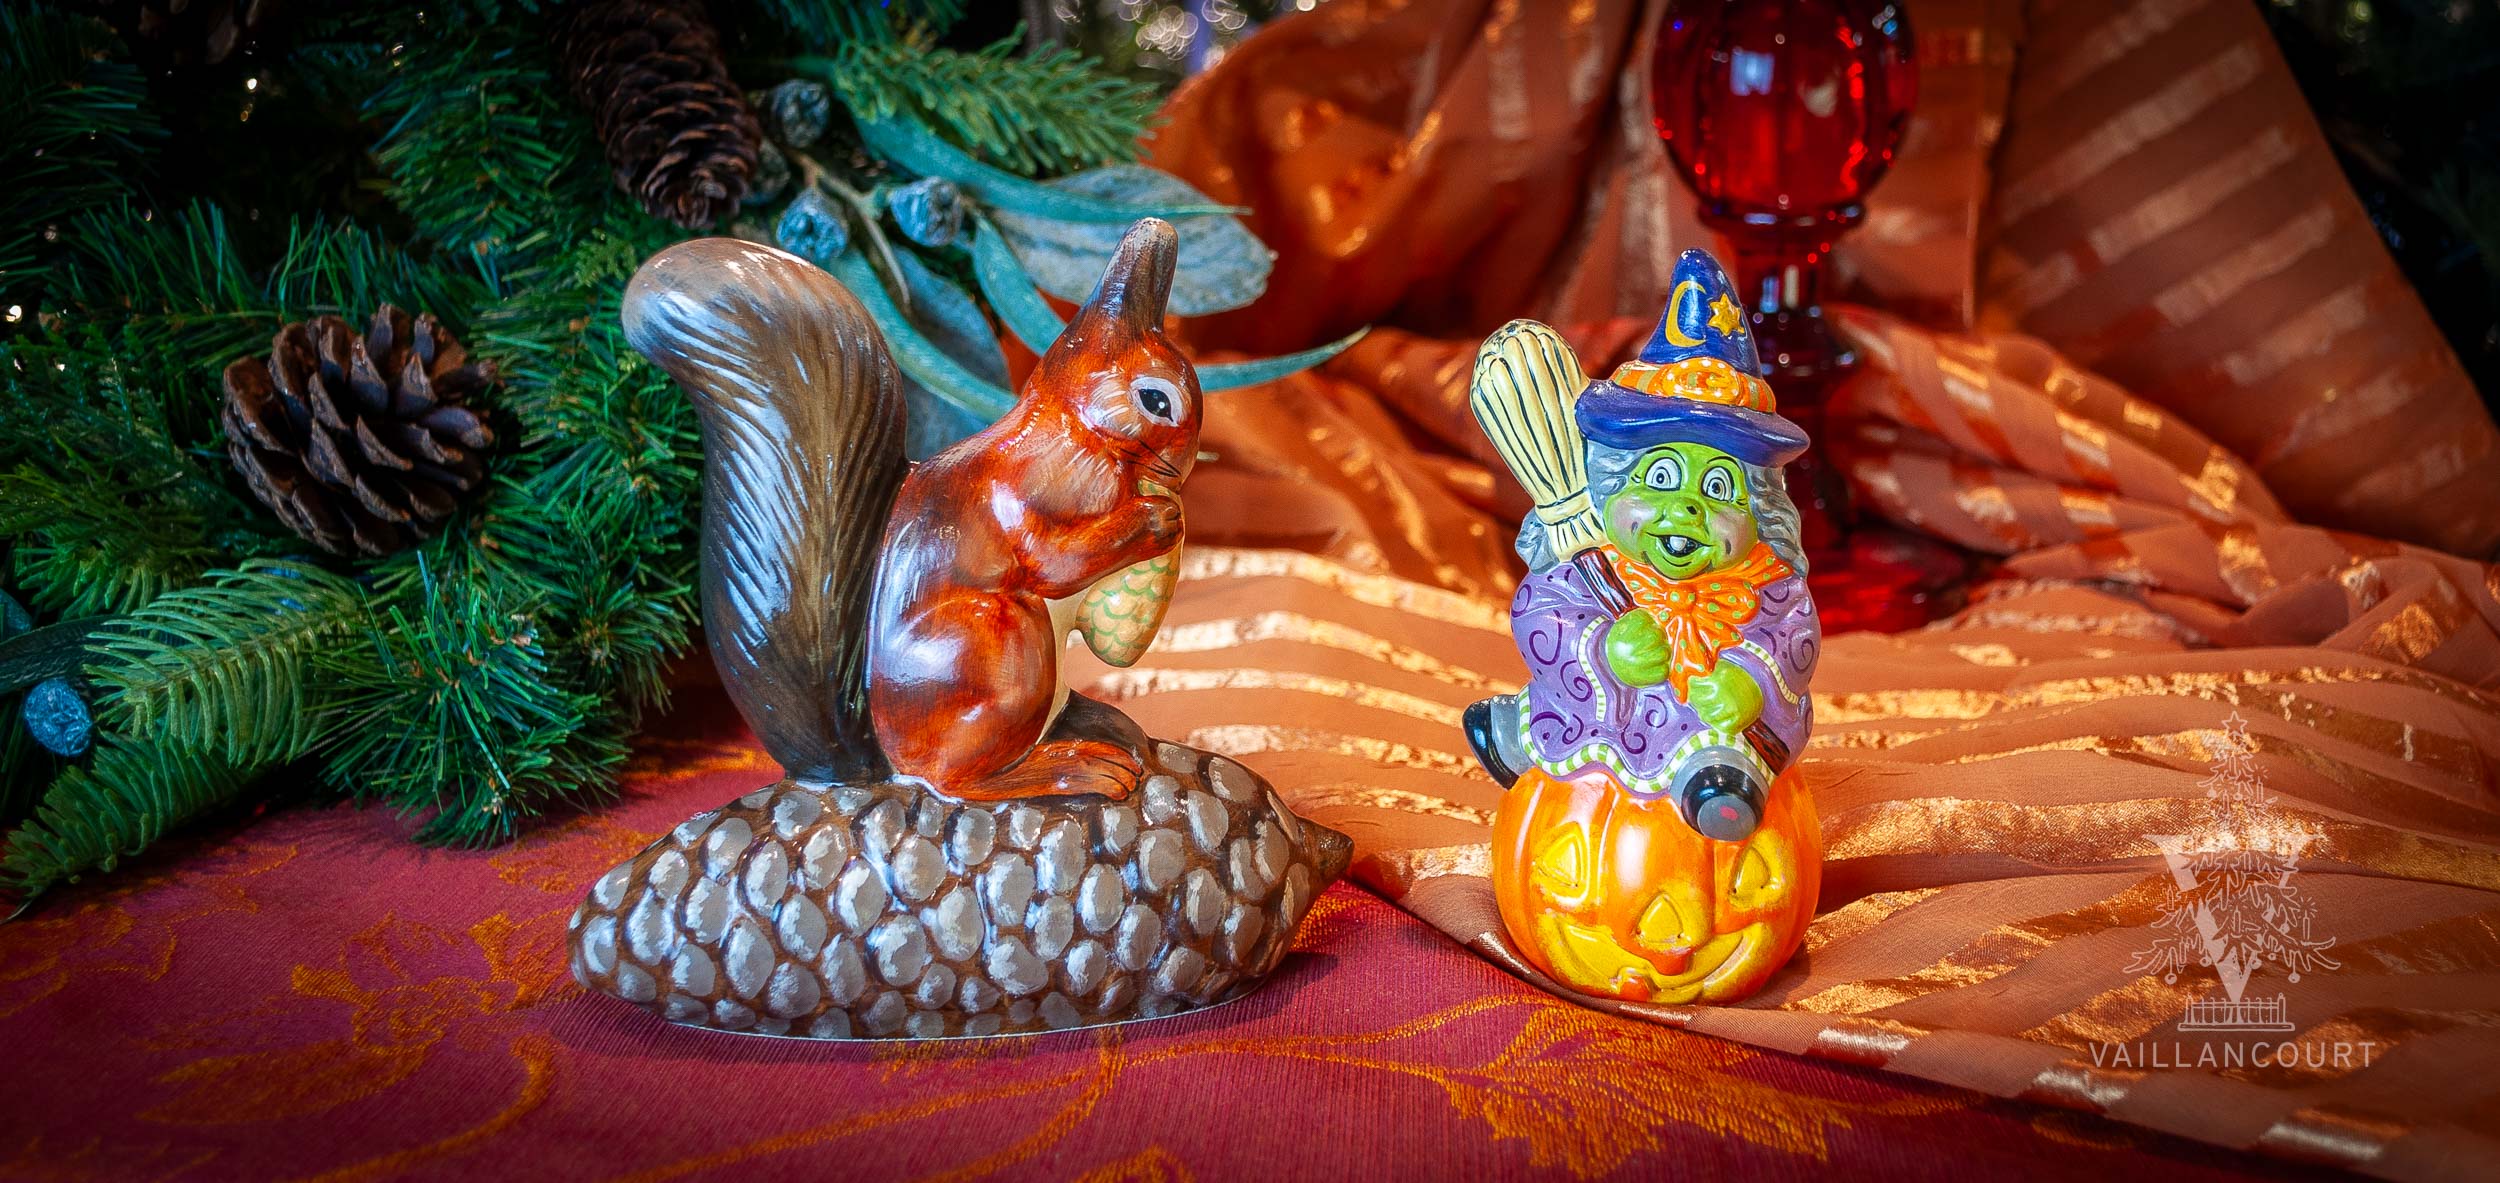 The autumn Squirrel on Pinecone and the Happy Witch on Pumpkin, VFA Nrs. 24021, 24023